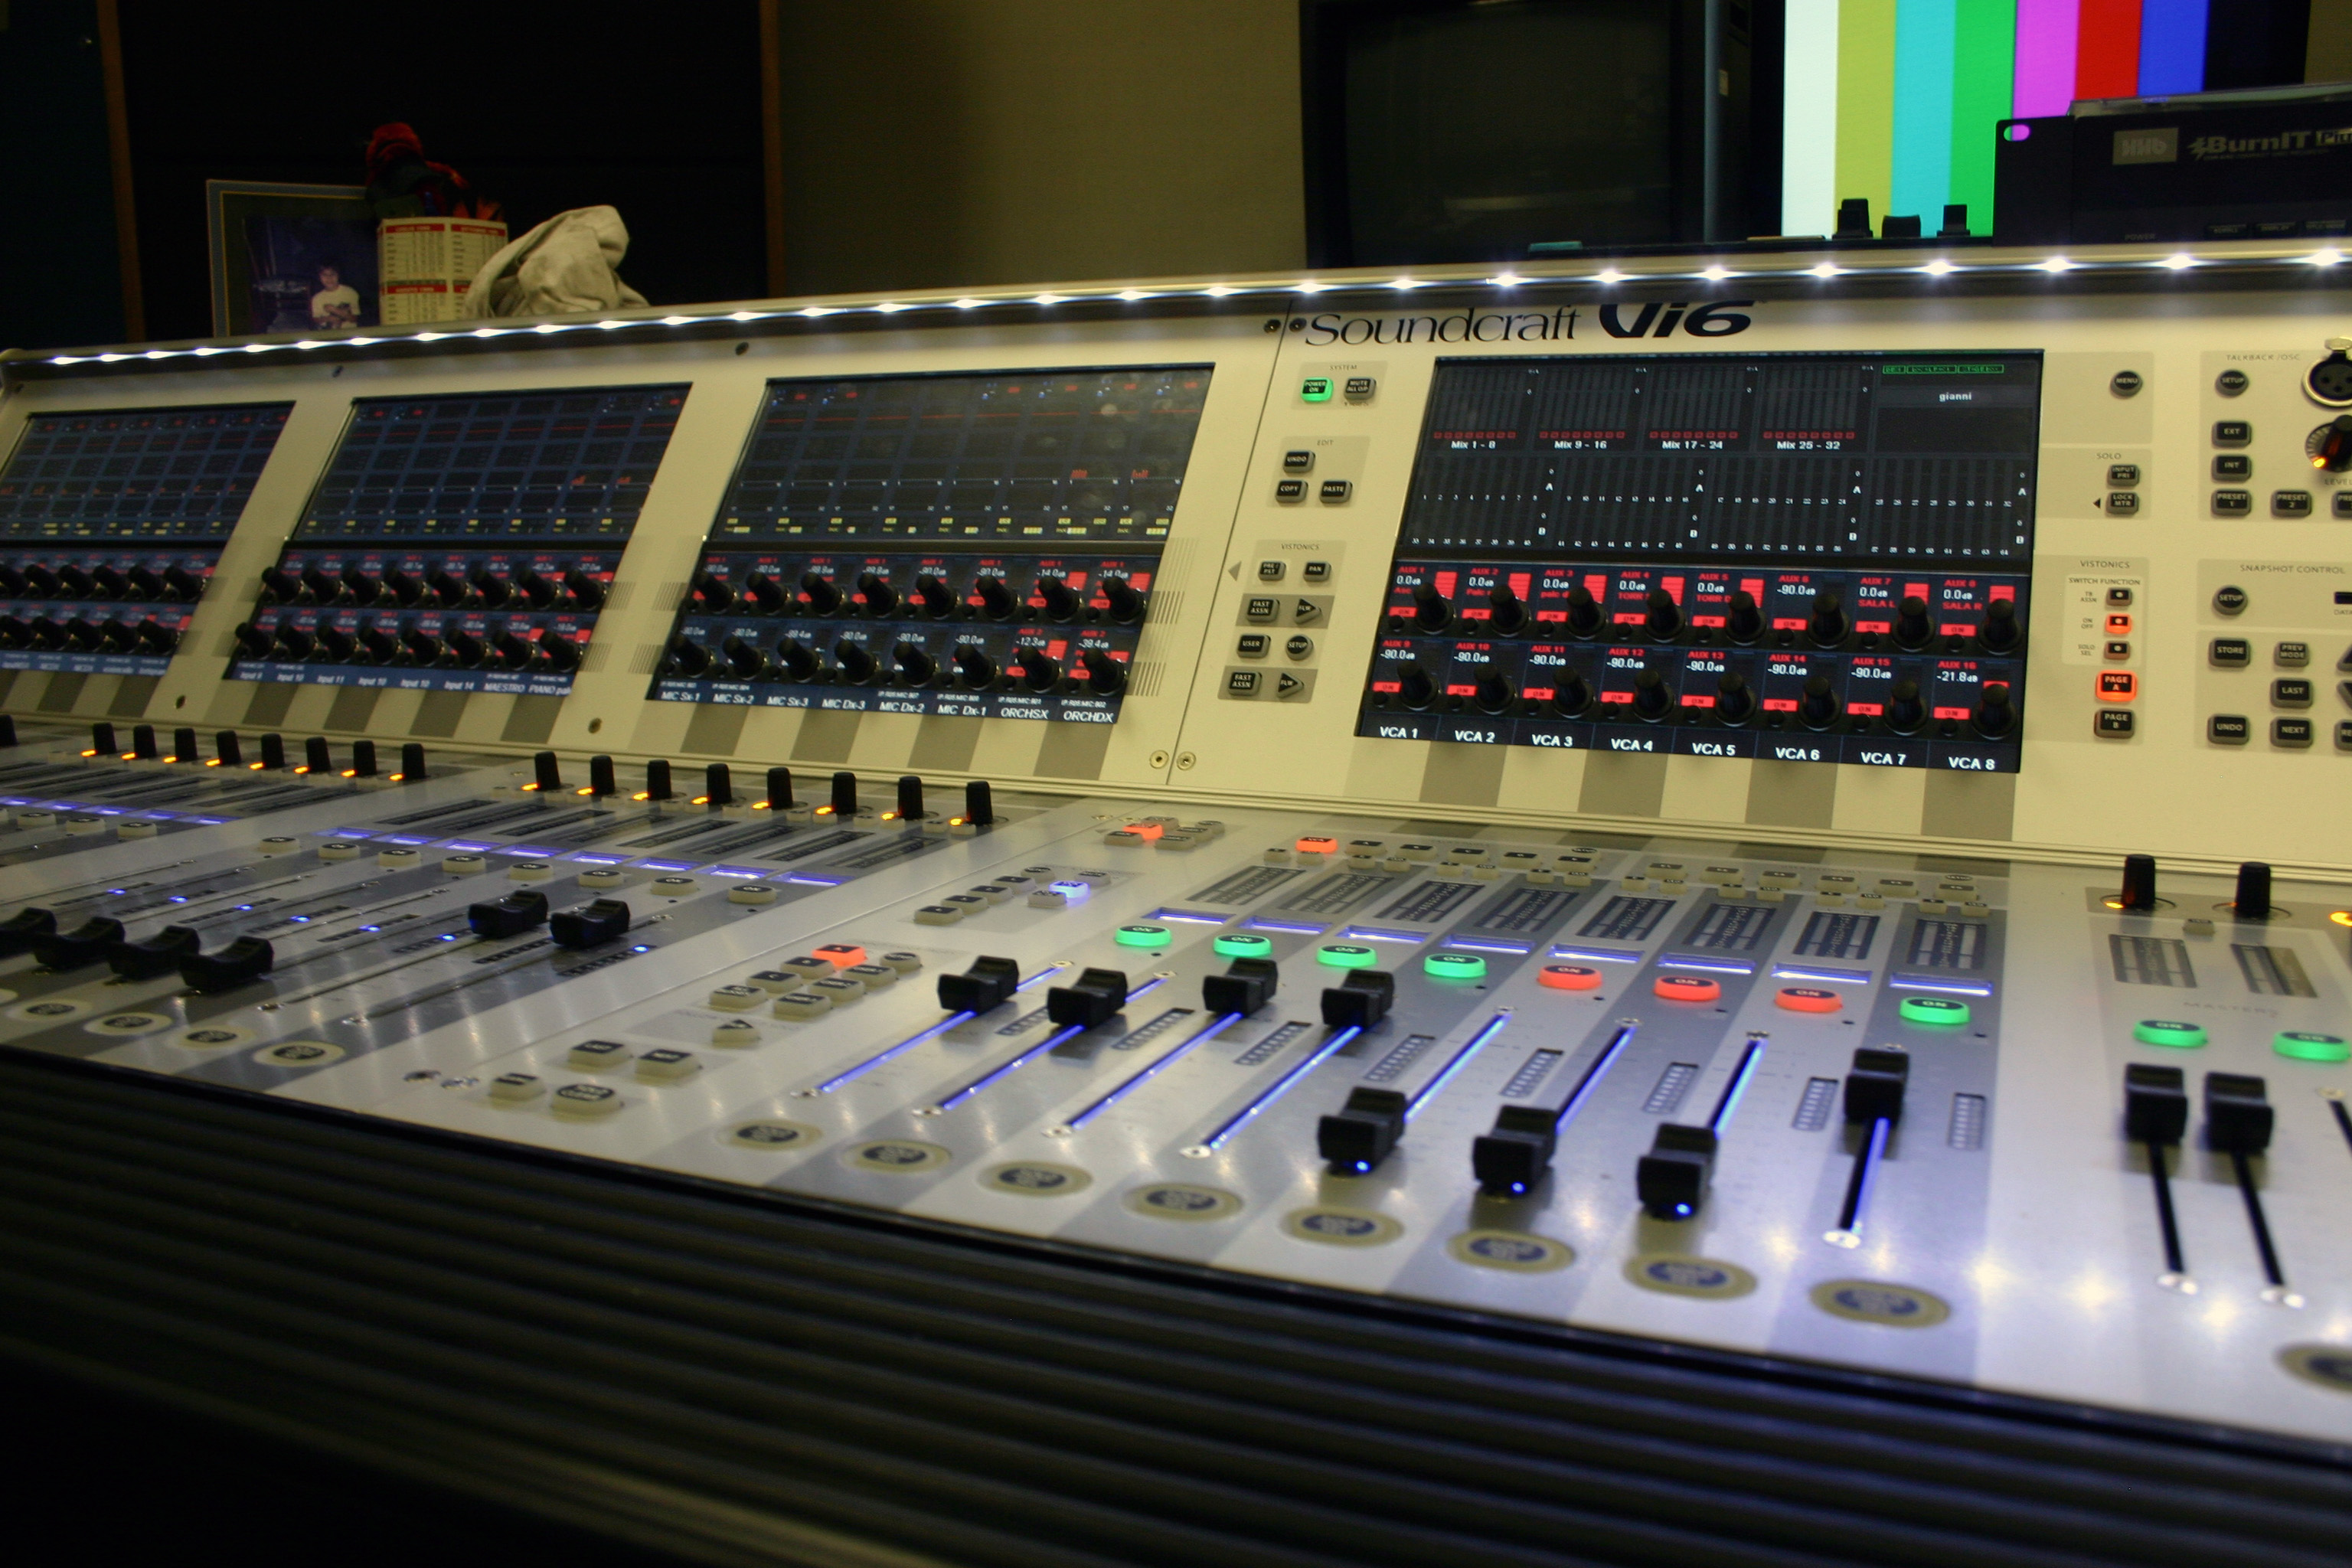 The big audio digital mixer wchich controls all audio signals coming from or going to the auditorium